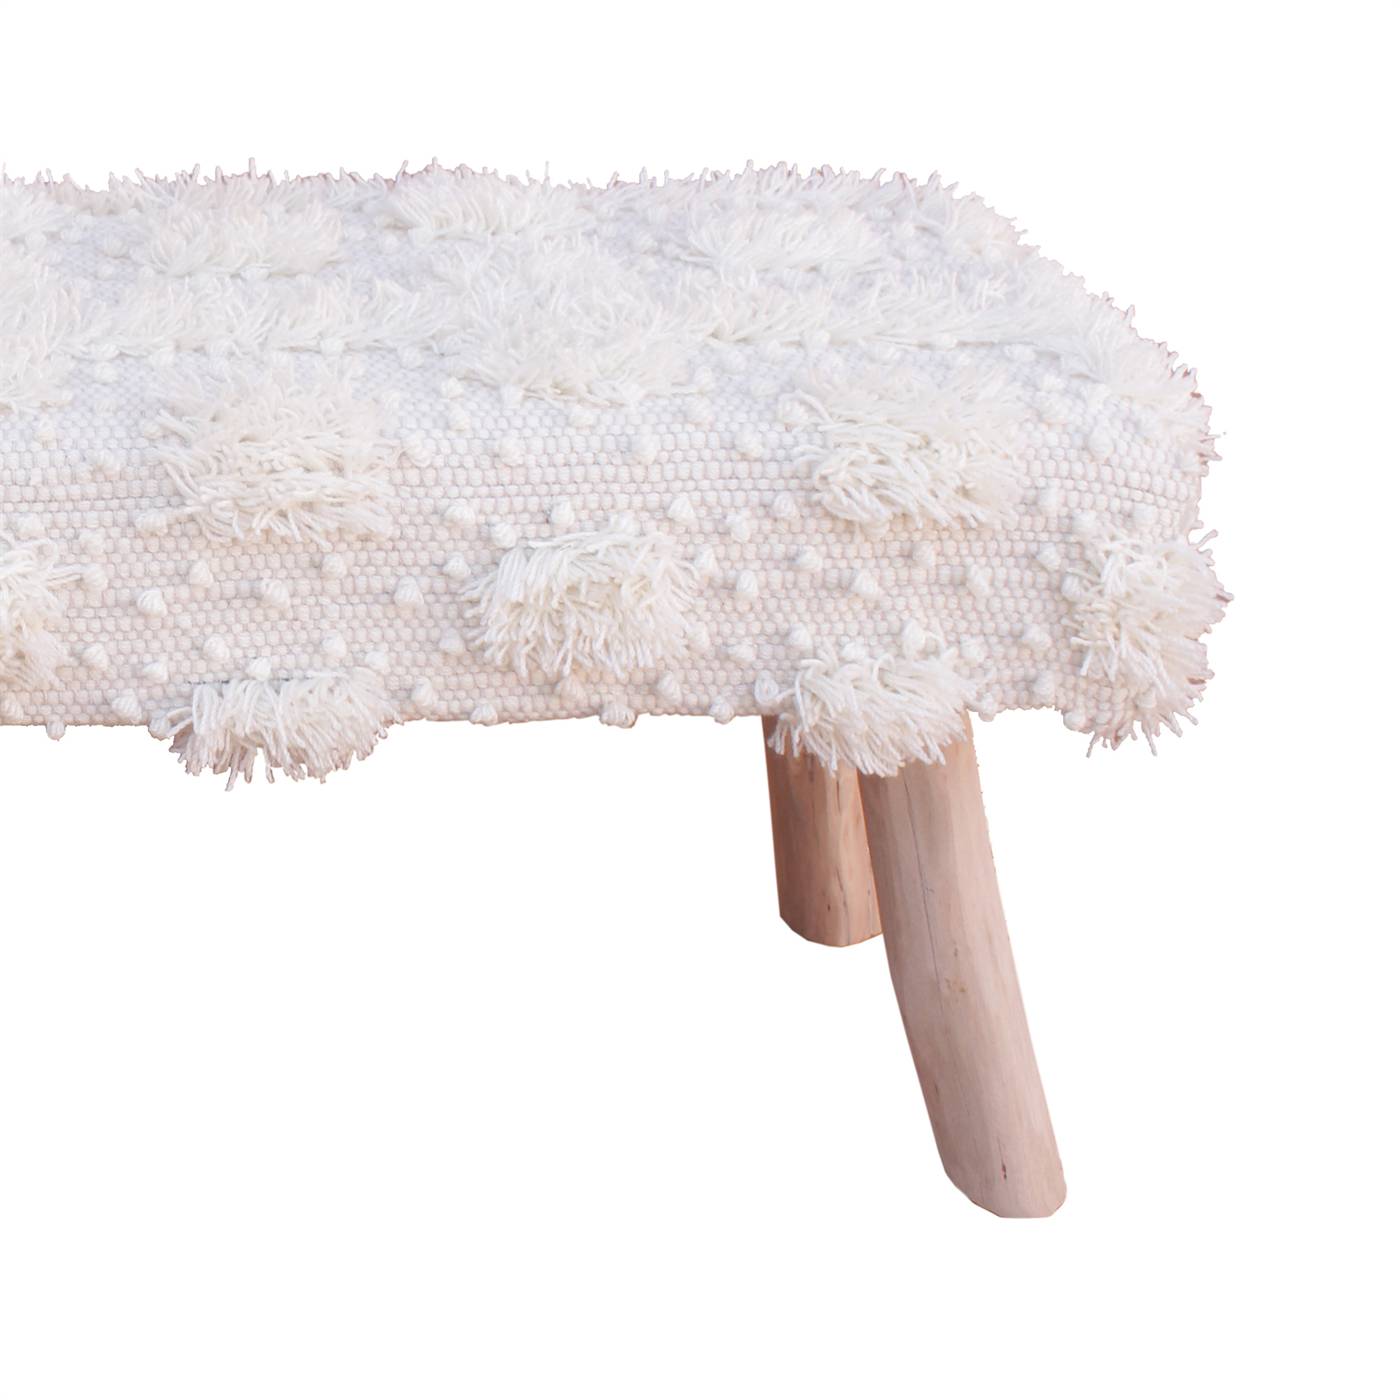 Parkin Bench, 120x40x50 cm, Natural White, Wool, Hand Woven, Pitloom, Cut And Loop